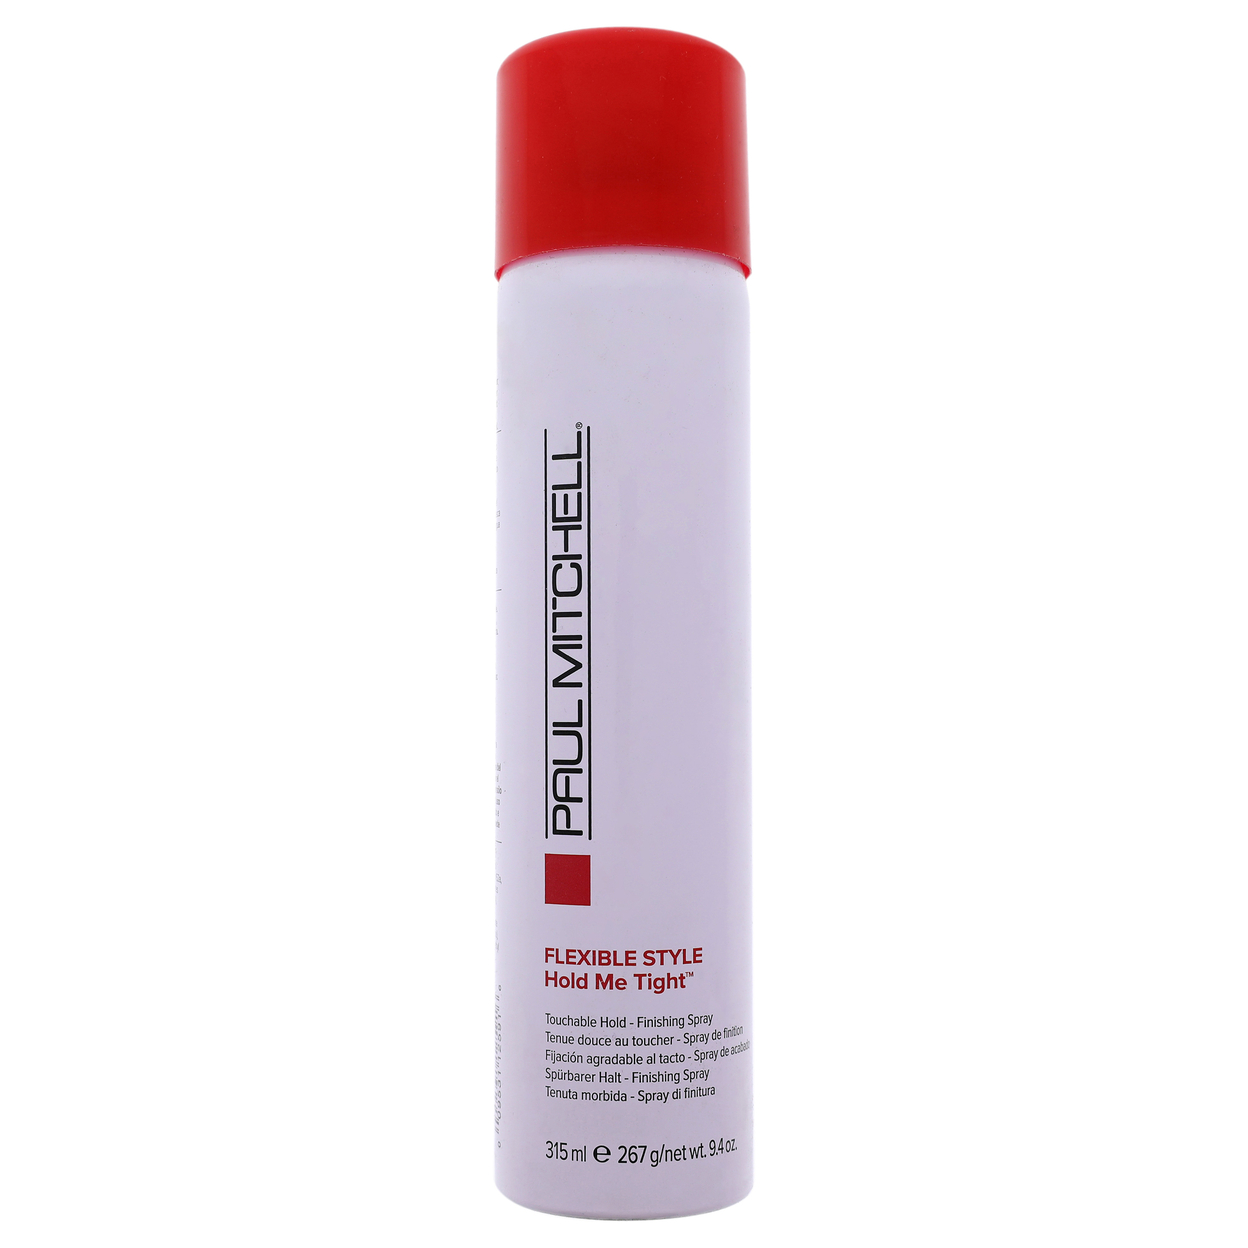 Paul Mitchell Flexible Style Hold Me Tight Hairspray 9.4 Oz